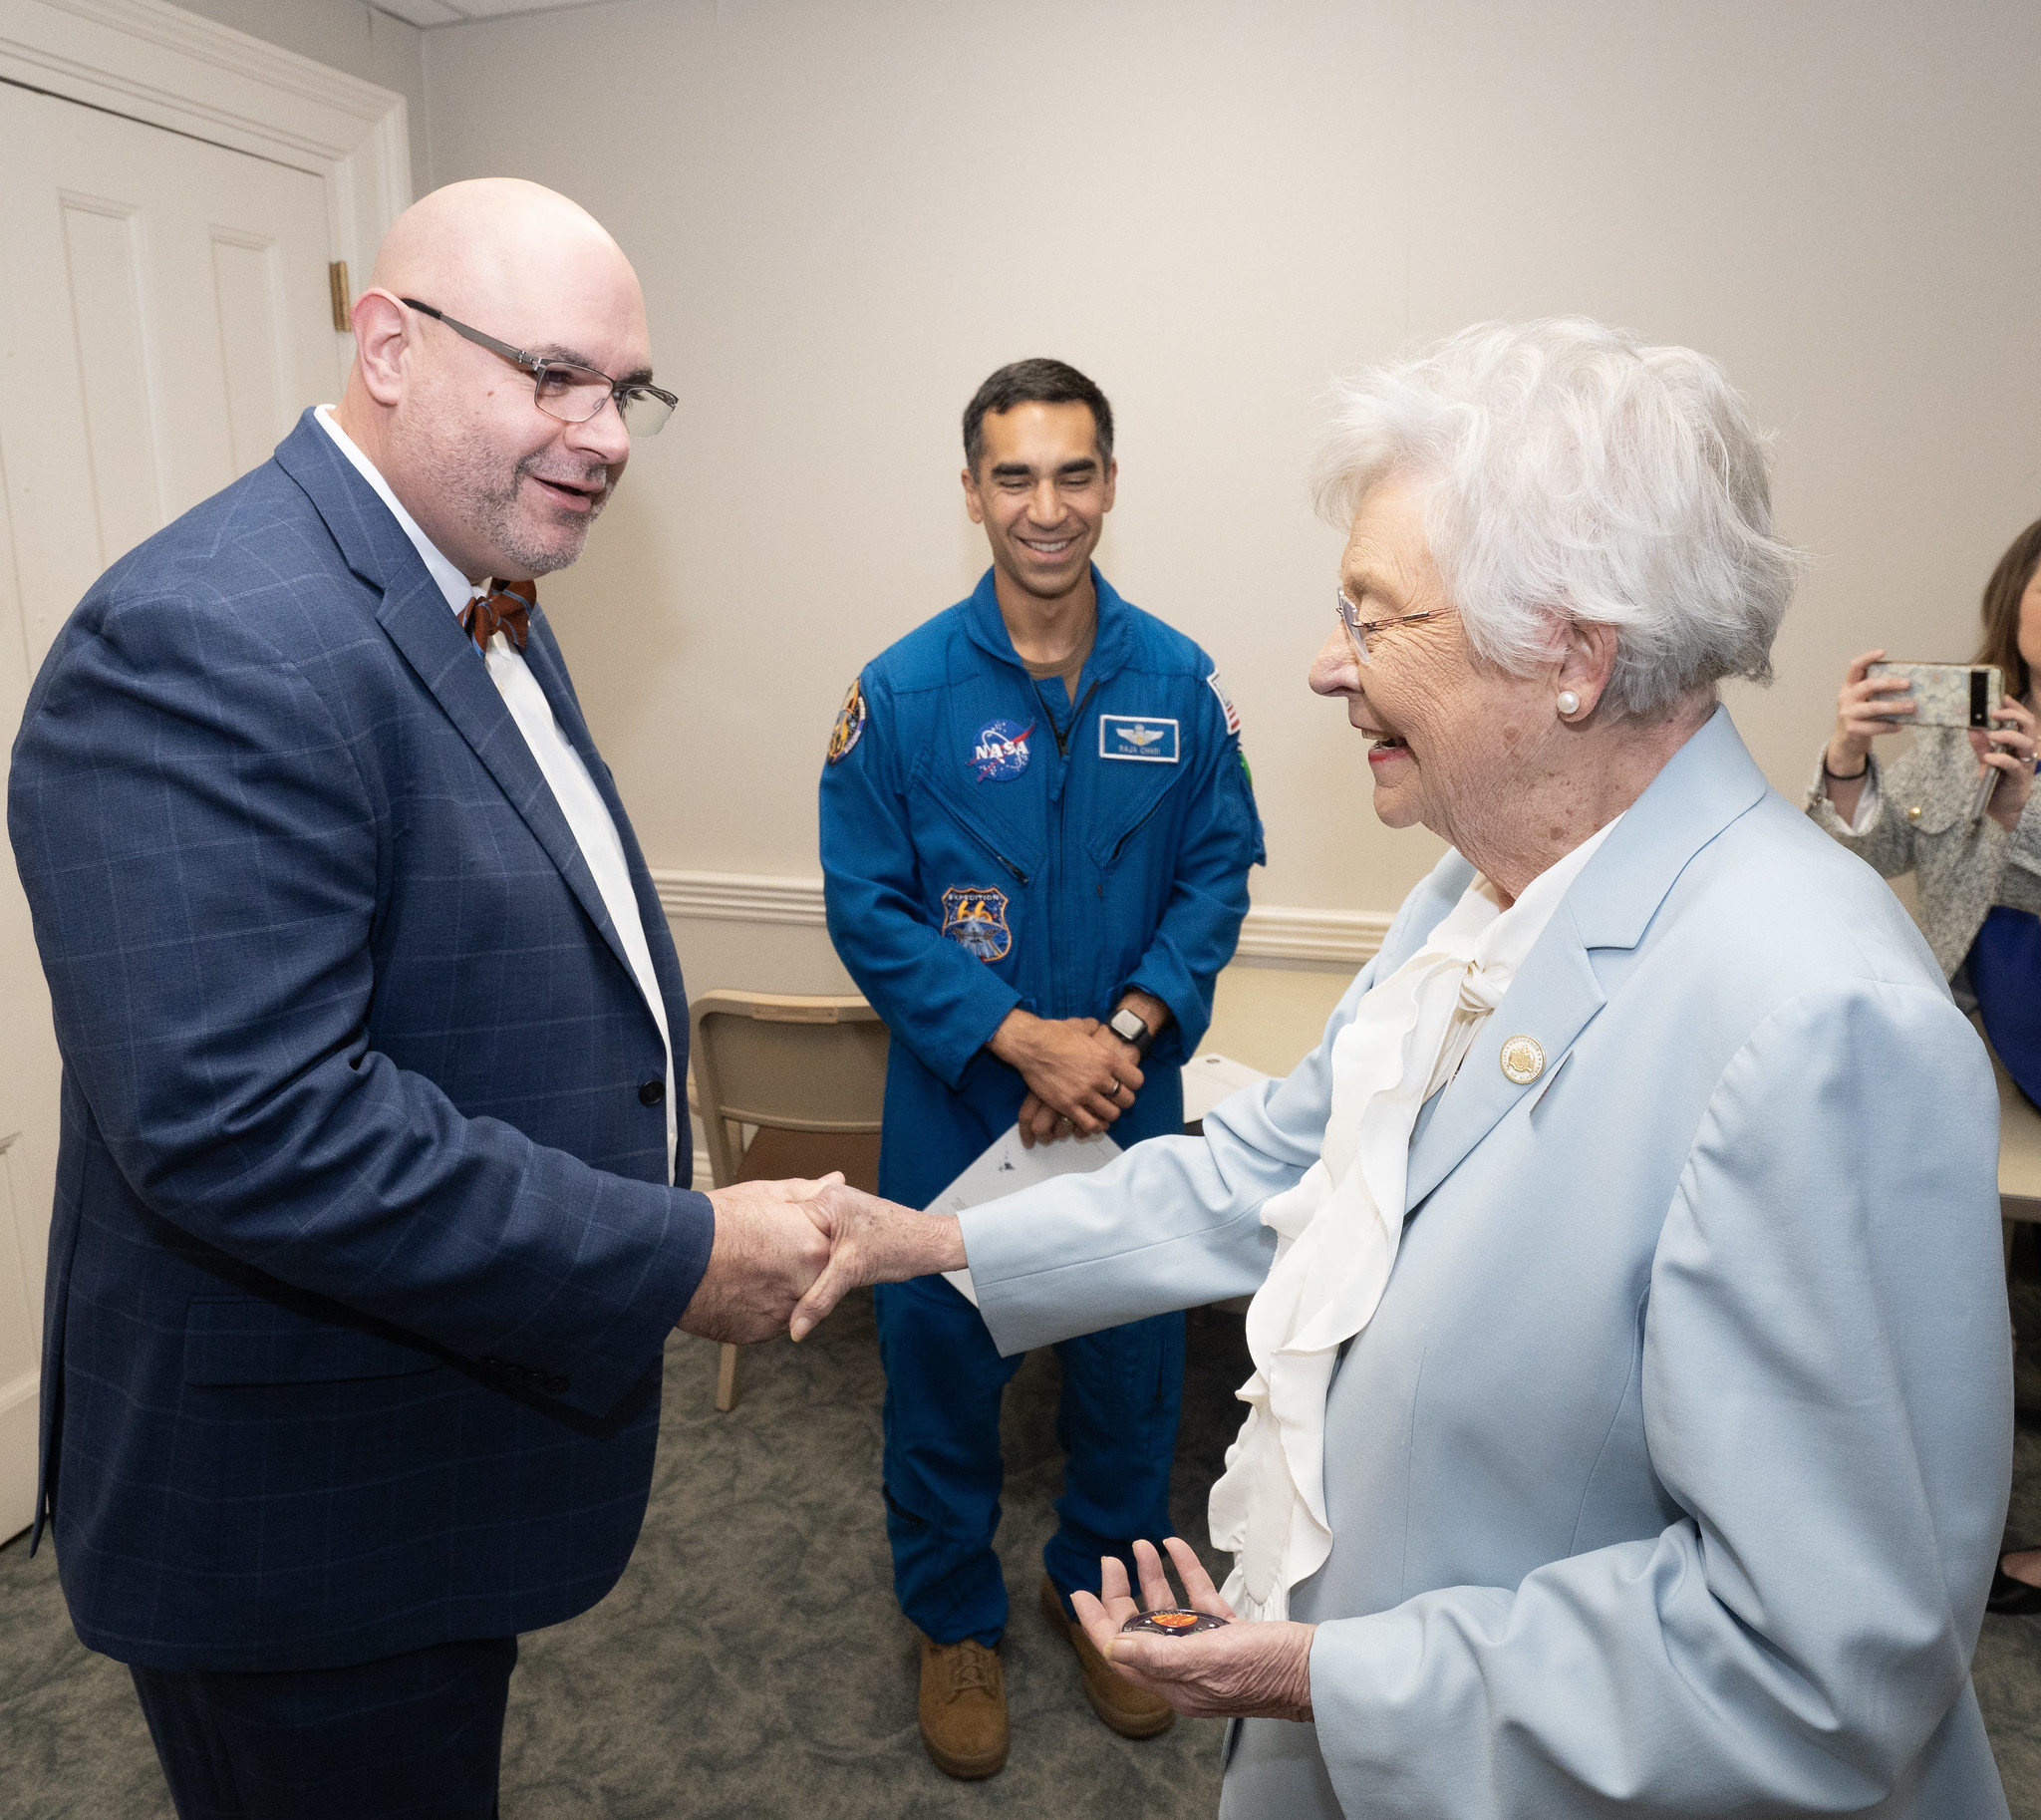 Alabama Gov. Kay Ivey, right, greets Pelfrey during Alabama Space Day as NASA astronaut Raja Chari, center, looks on. The governor issued a proclamation declaring the state holiday in honor of the aerospace industry’s impact on Alabama.